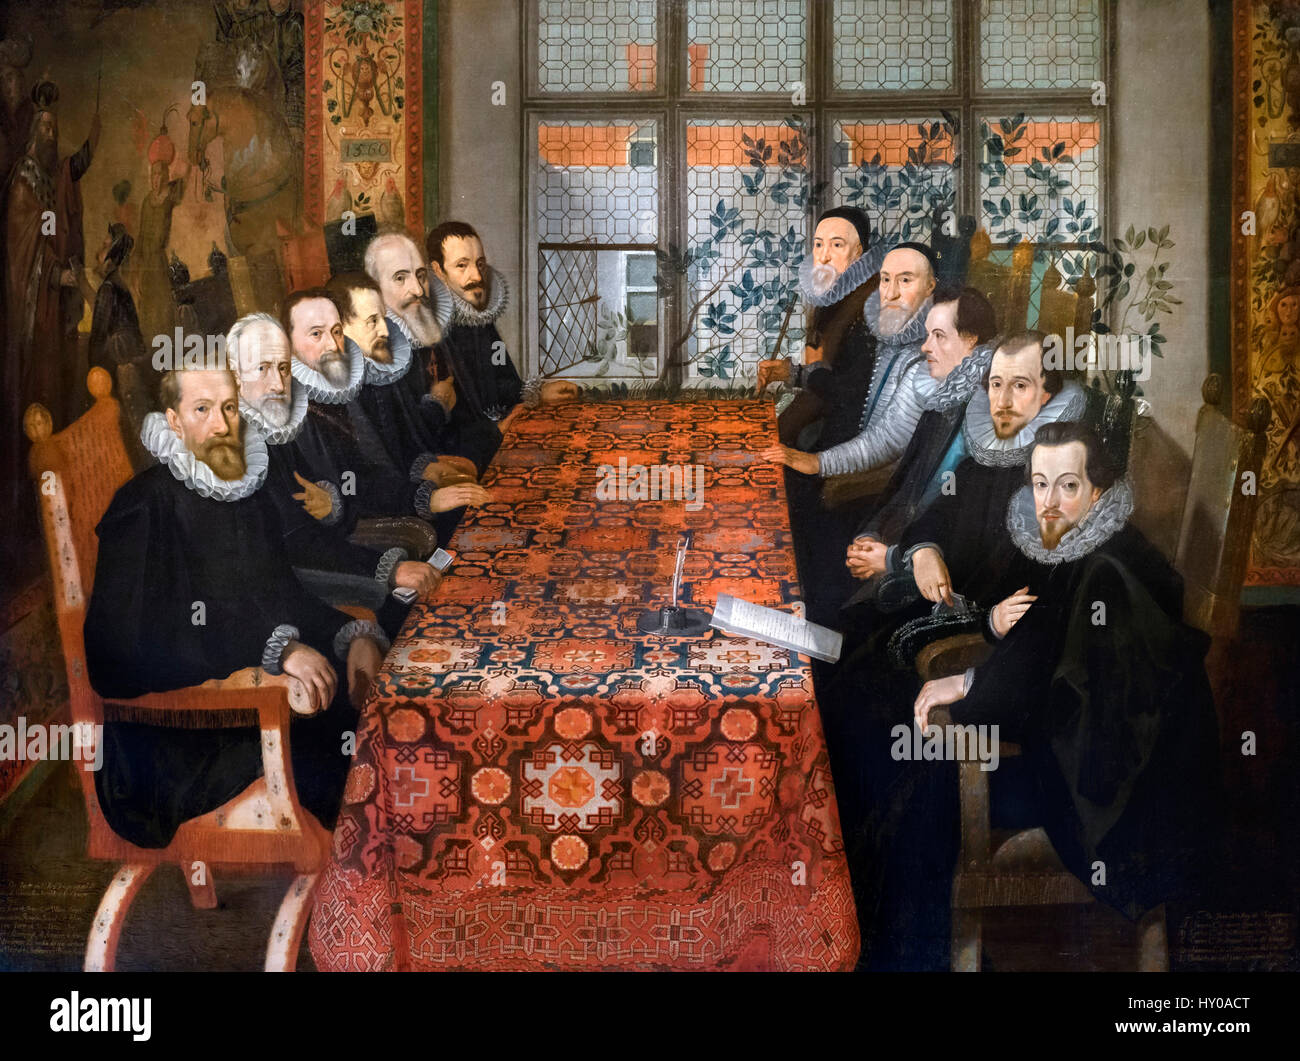 'Somerset House Conference, 19th August 1604' by Juan Pantoja de la Cruz, oil on canvas, c.1604. The Treaty of London was signed at Somerset House in 1604, bringing an end to the Anglo-Spanish War (1585-1604). Robert Cecil is sitting in the right foreground. Stock Photo